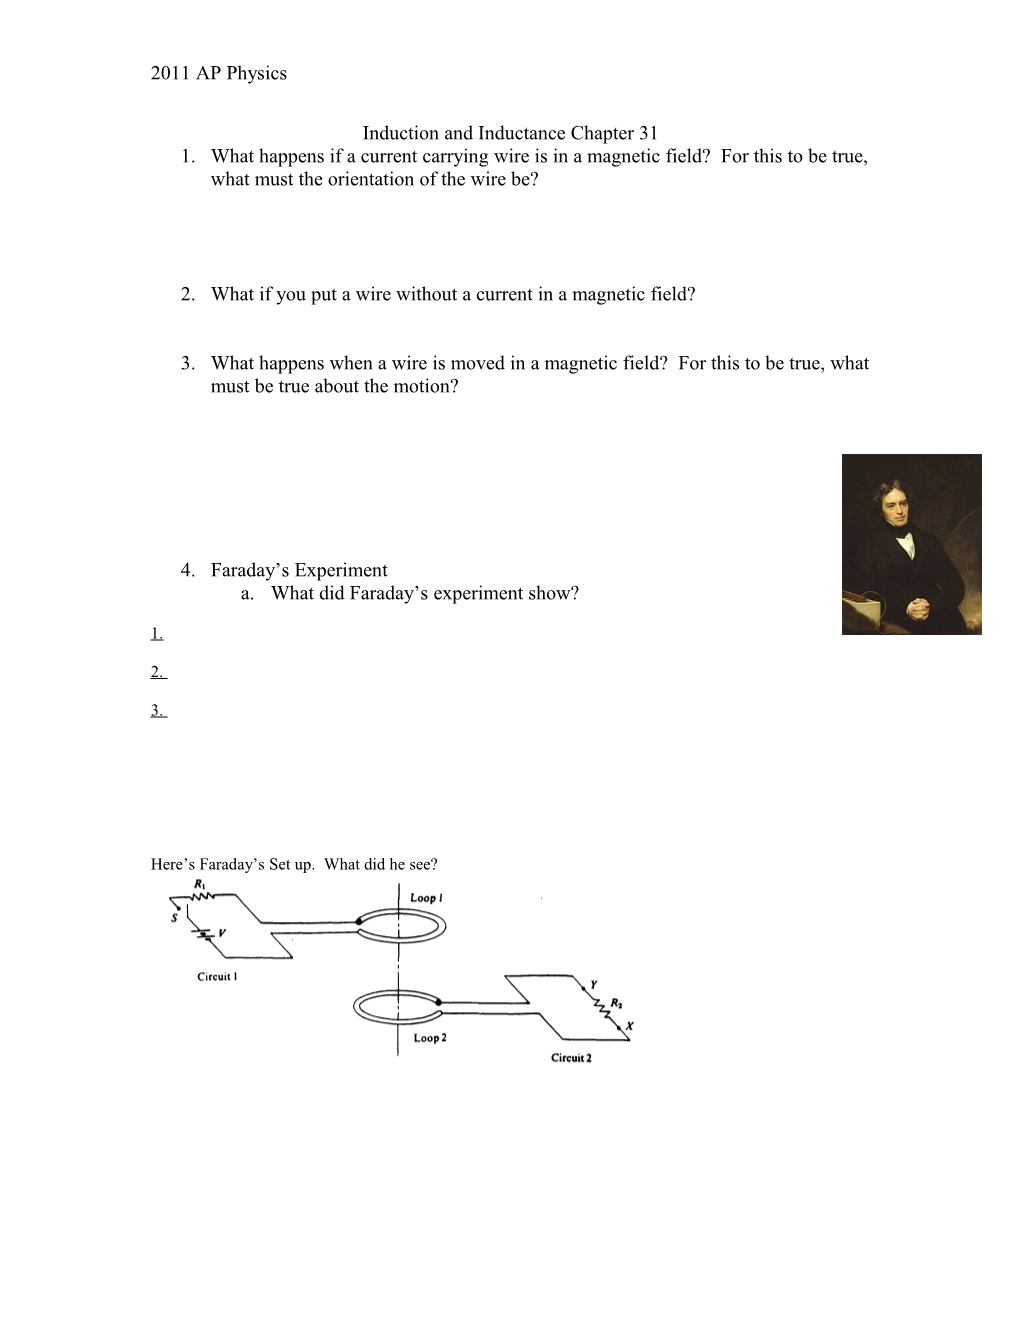 Induction and Inductance Chapter 31 s1